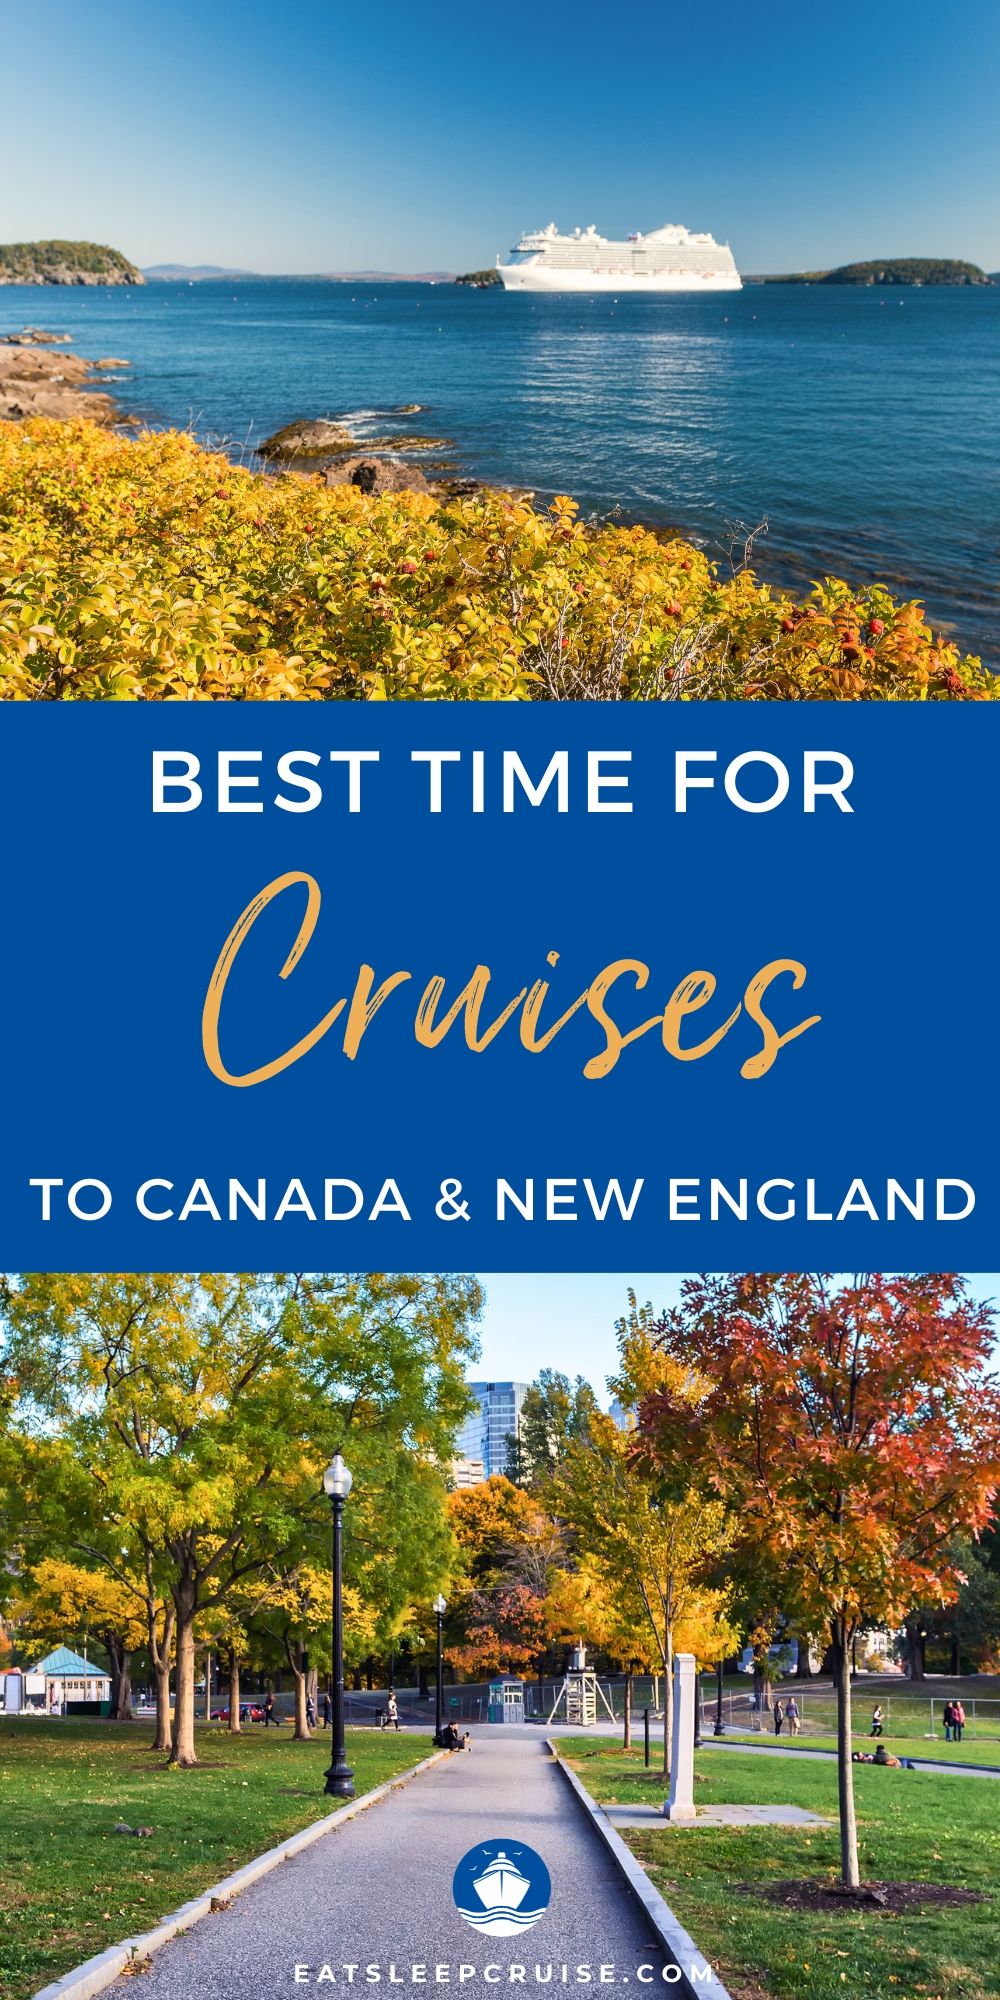 Best Time for a Canada & New England Cruise